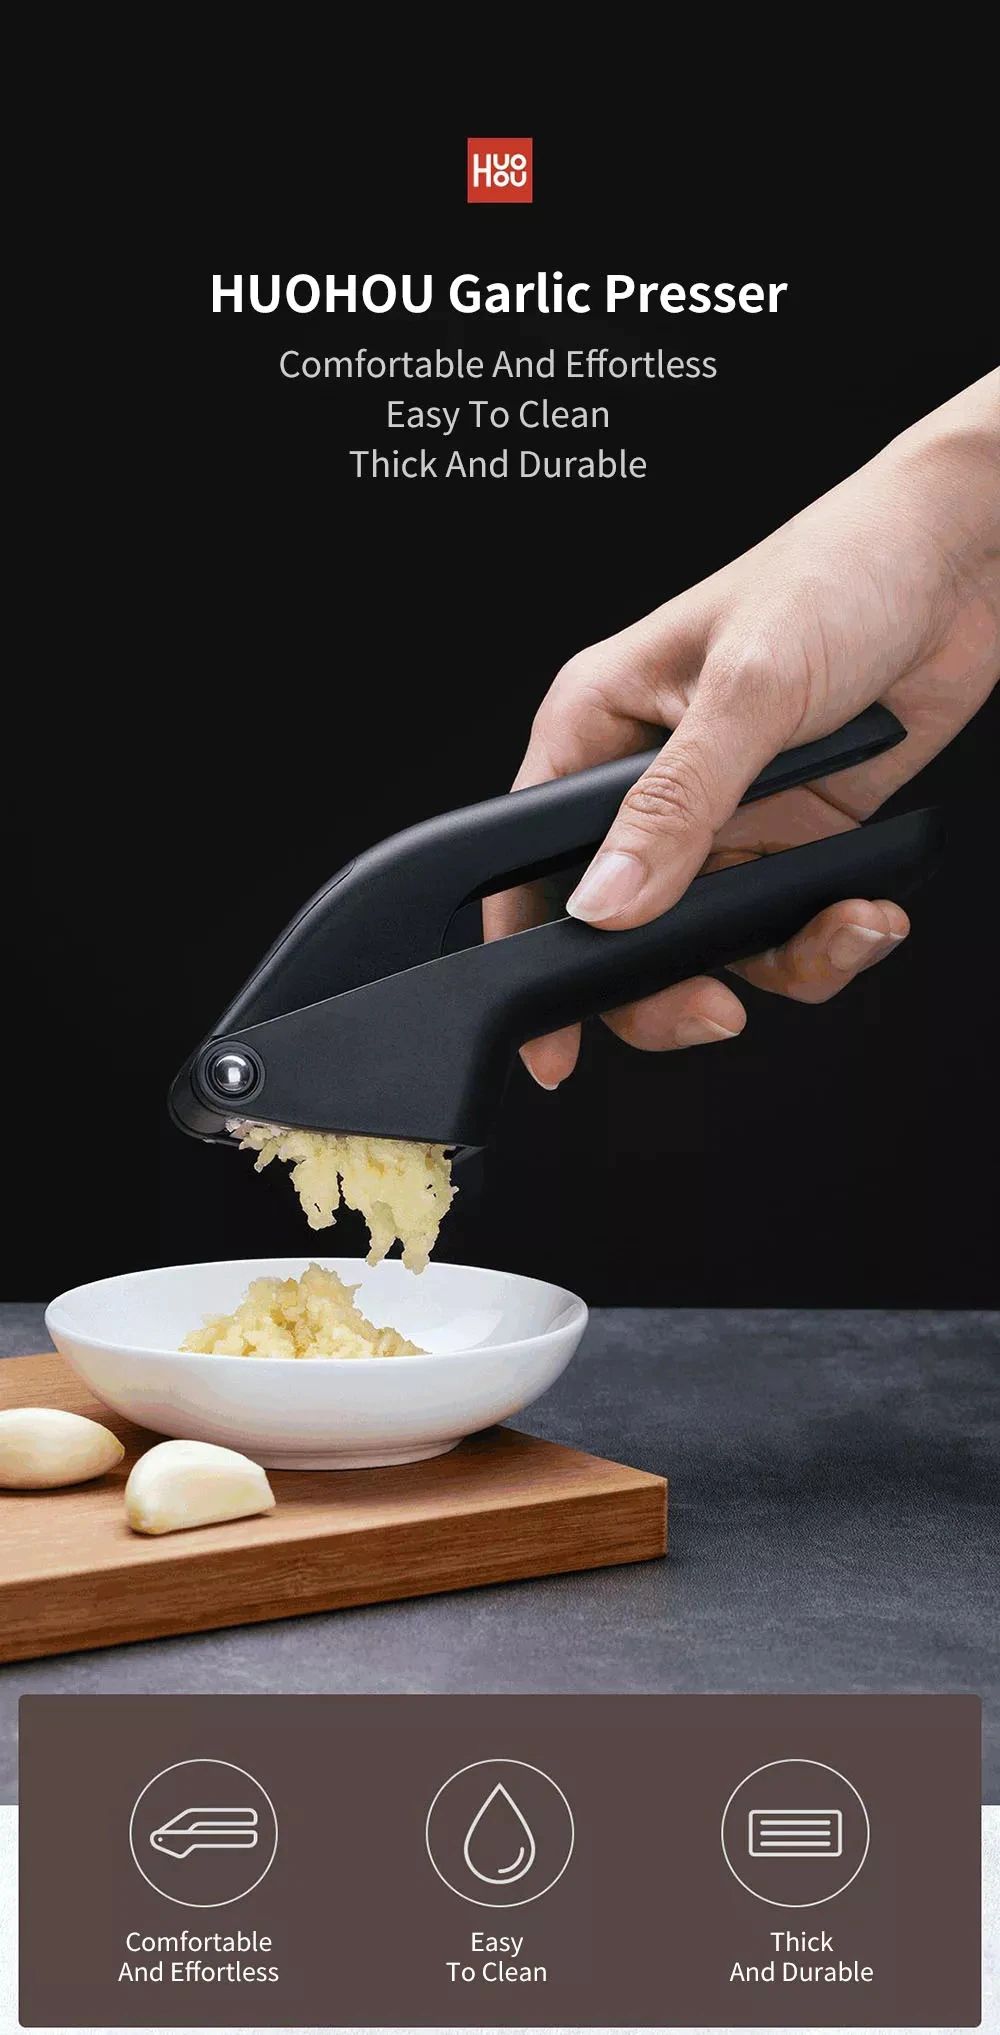 Features: Ergonomic Design Handle In the process of using the product, it fits the natural shape of the hand to the utmost extent. The texture of the matte is comfortable, the grip is comfortable, the force is scientific, the pressure resistance is strong, and the garlic head is very efficient. Simple And Openable Platen The pressure plate adopts a simple flat design, which can be opened and sealed very conveniently and flexibly to prevent bacteria from hiding and breeding, which is very healthy and safe. Stainless steel material, easy to clean Uniform Holes, One Second For Garlic Mud 63 uniform holes, caliber closed funnel design, more delicate garlic mud